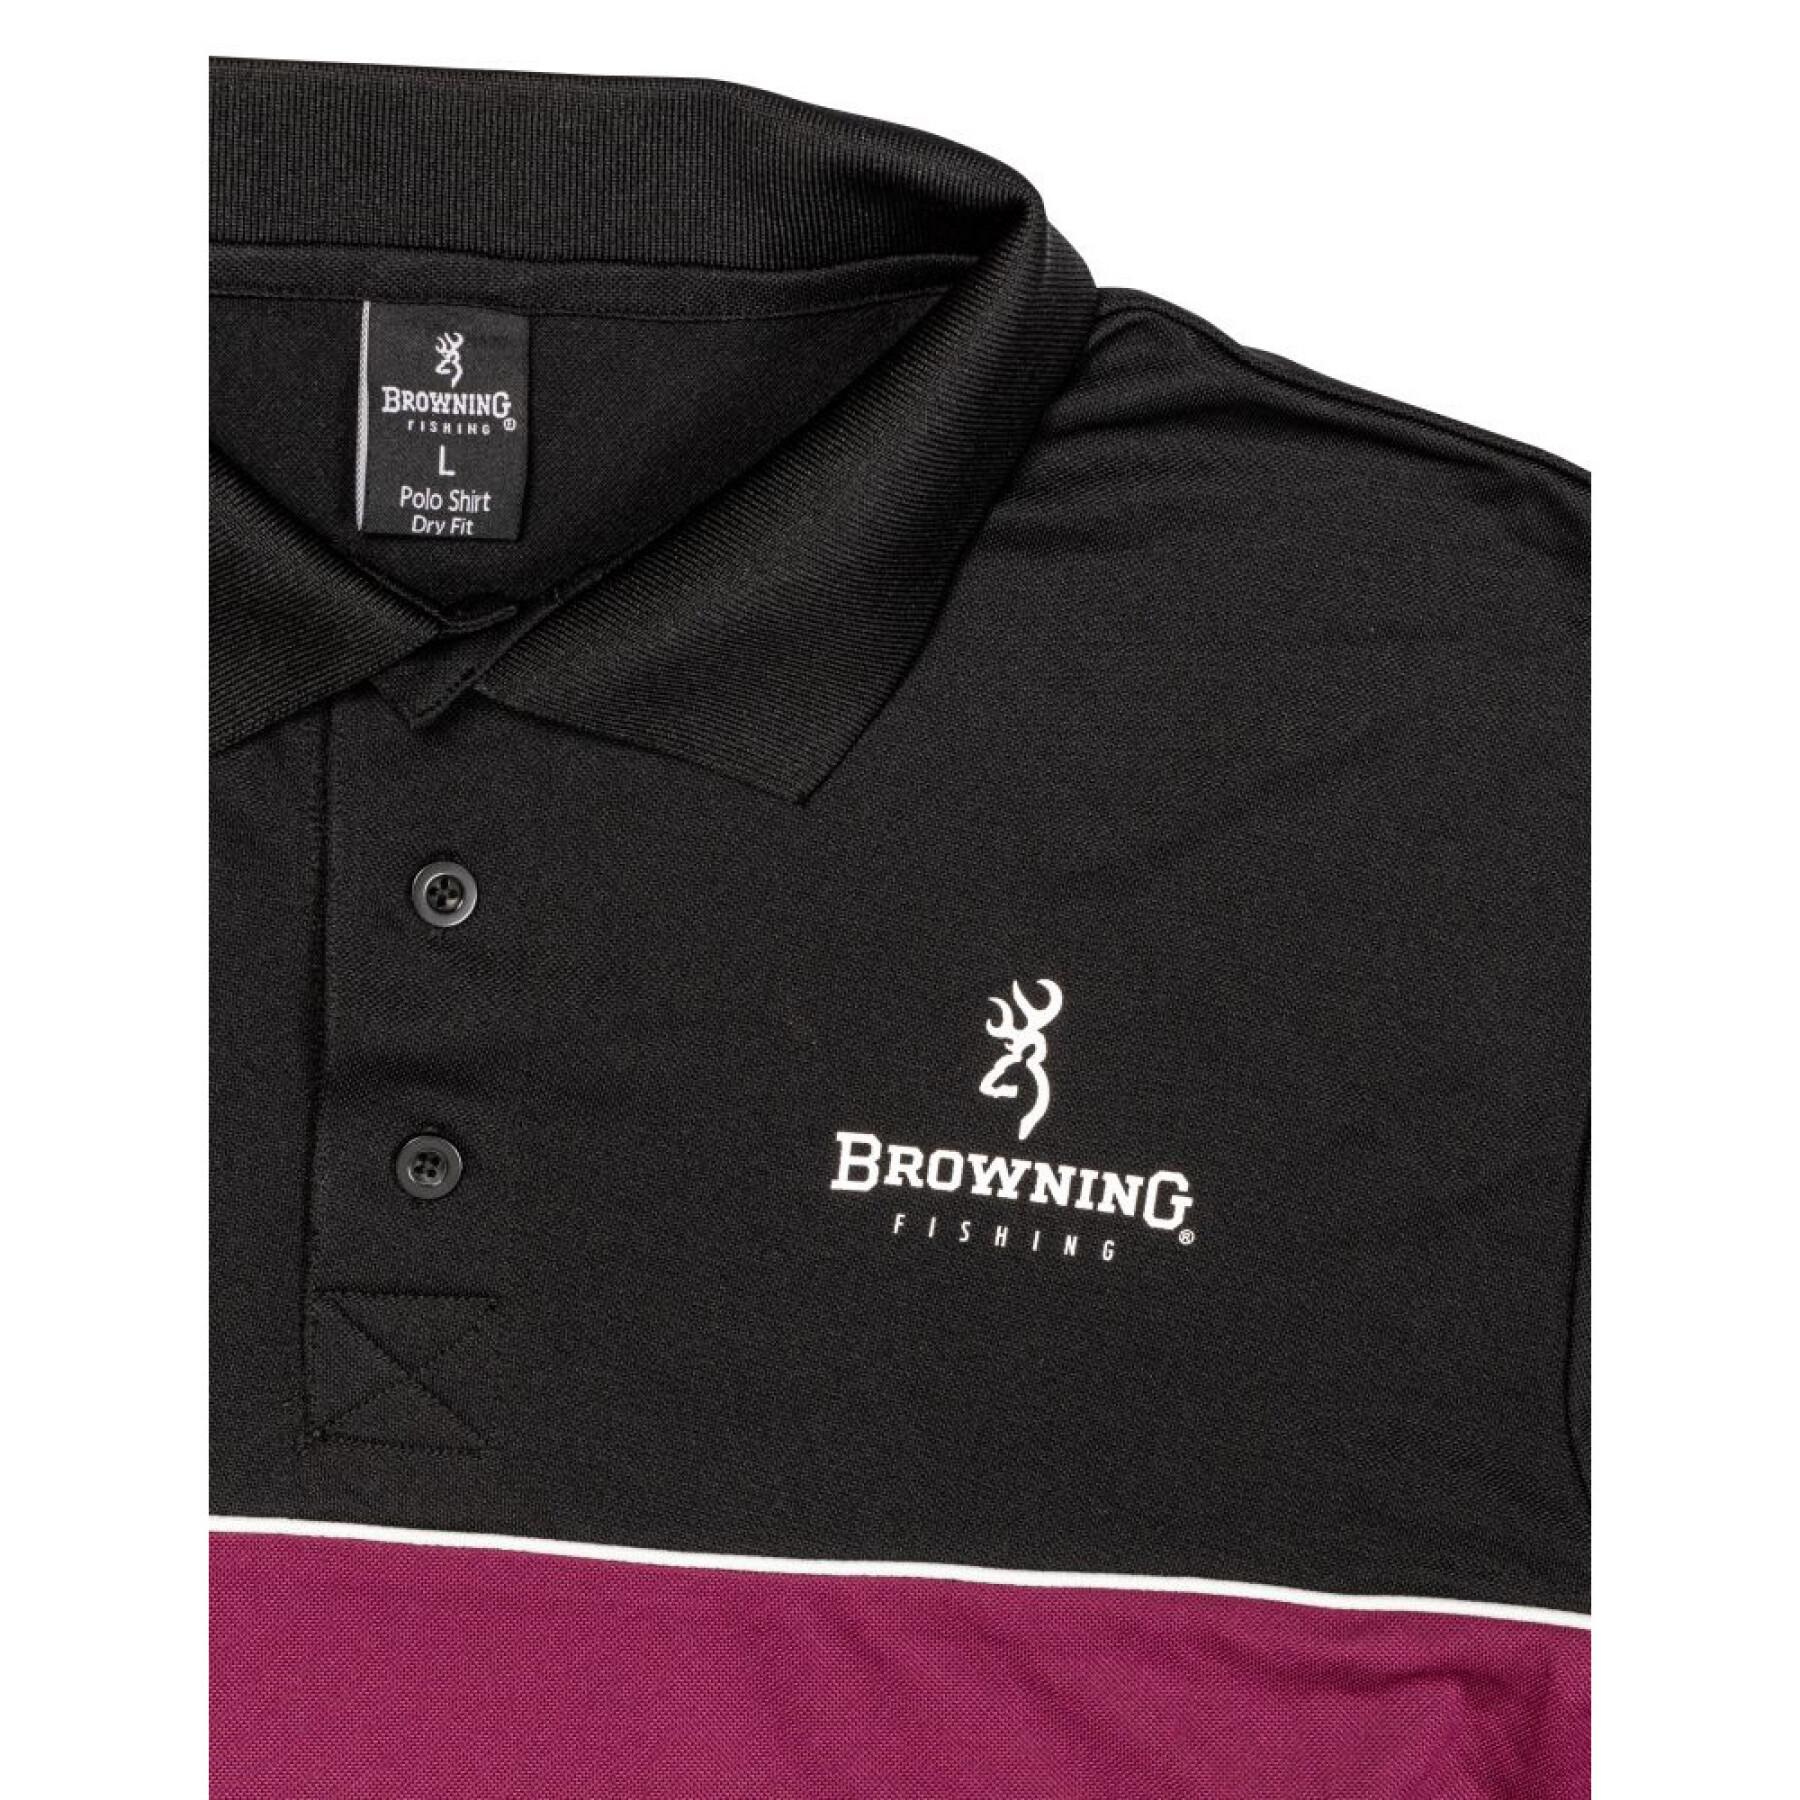 Dry fit polo Browning